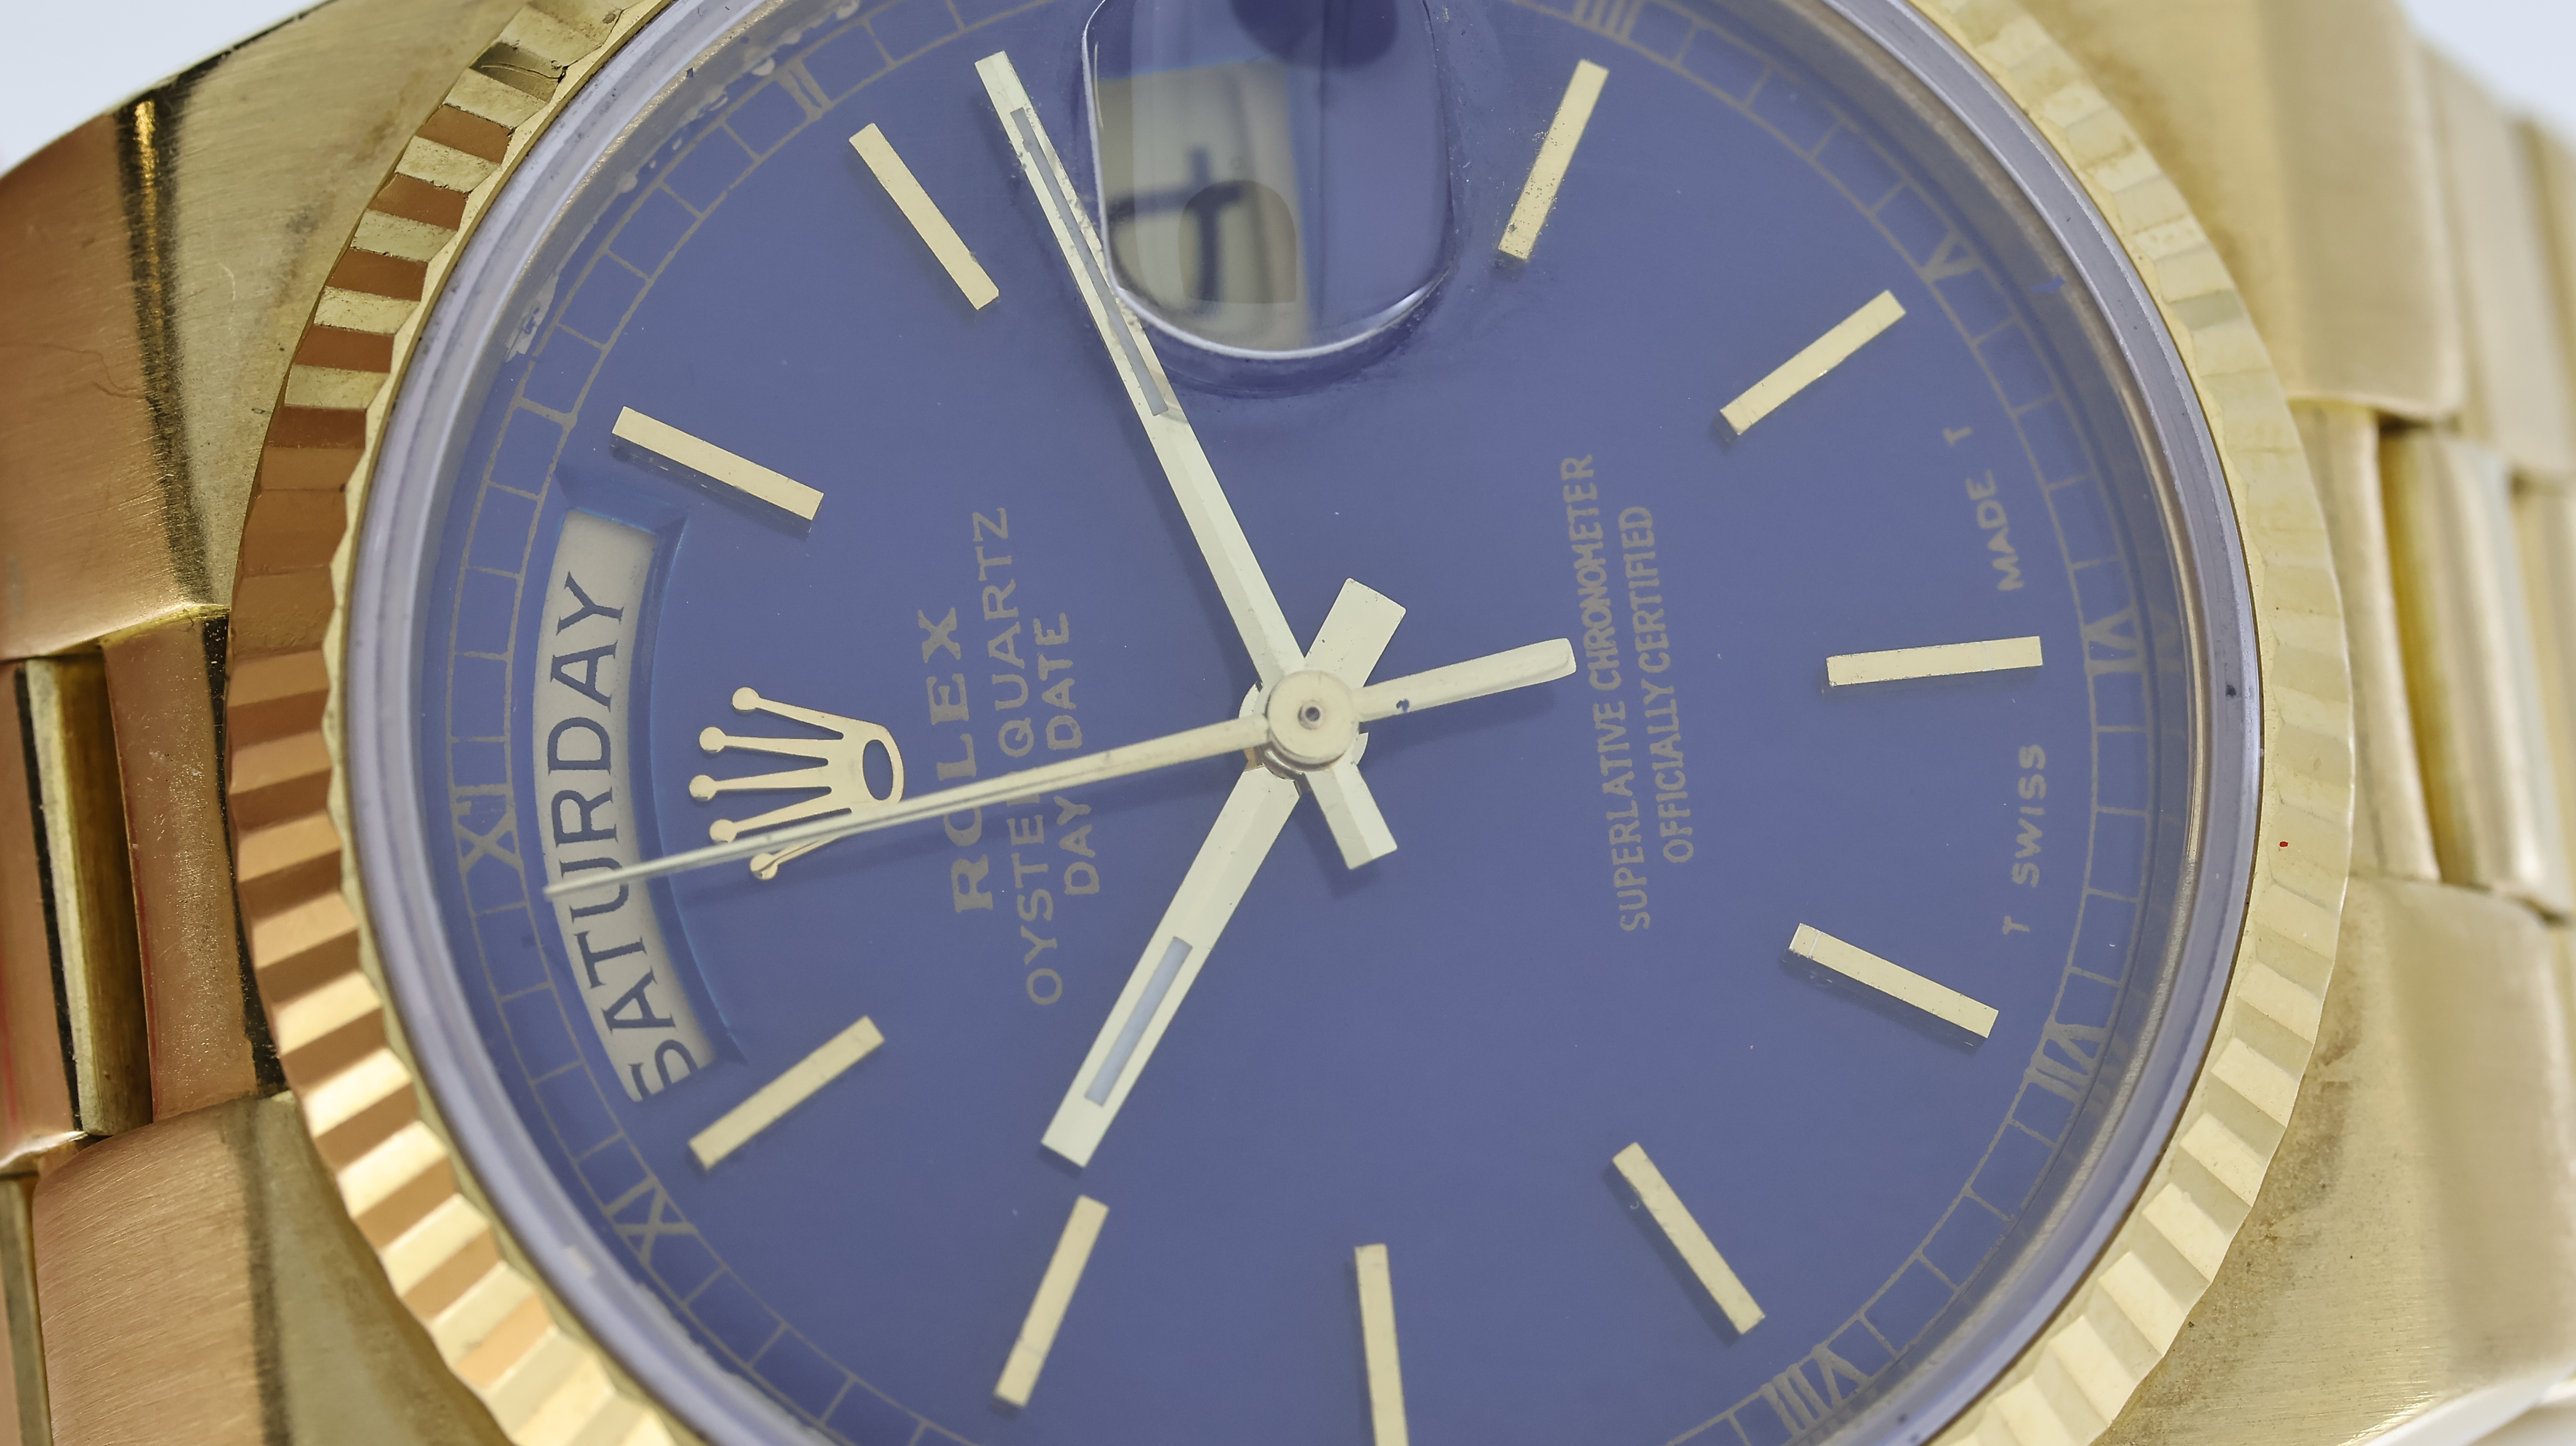 RARE 18CT ROLEX OYSTERQUARTZ DAY-DATE REFERENCE 19018 WITH BOX, blue dial with gold hour markers, - Image 6 of 12